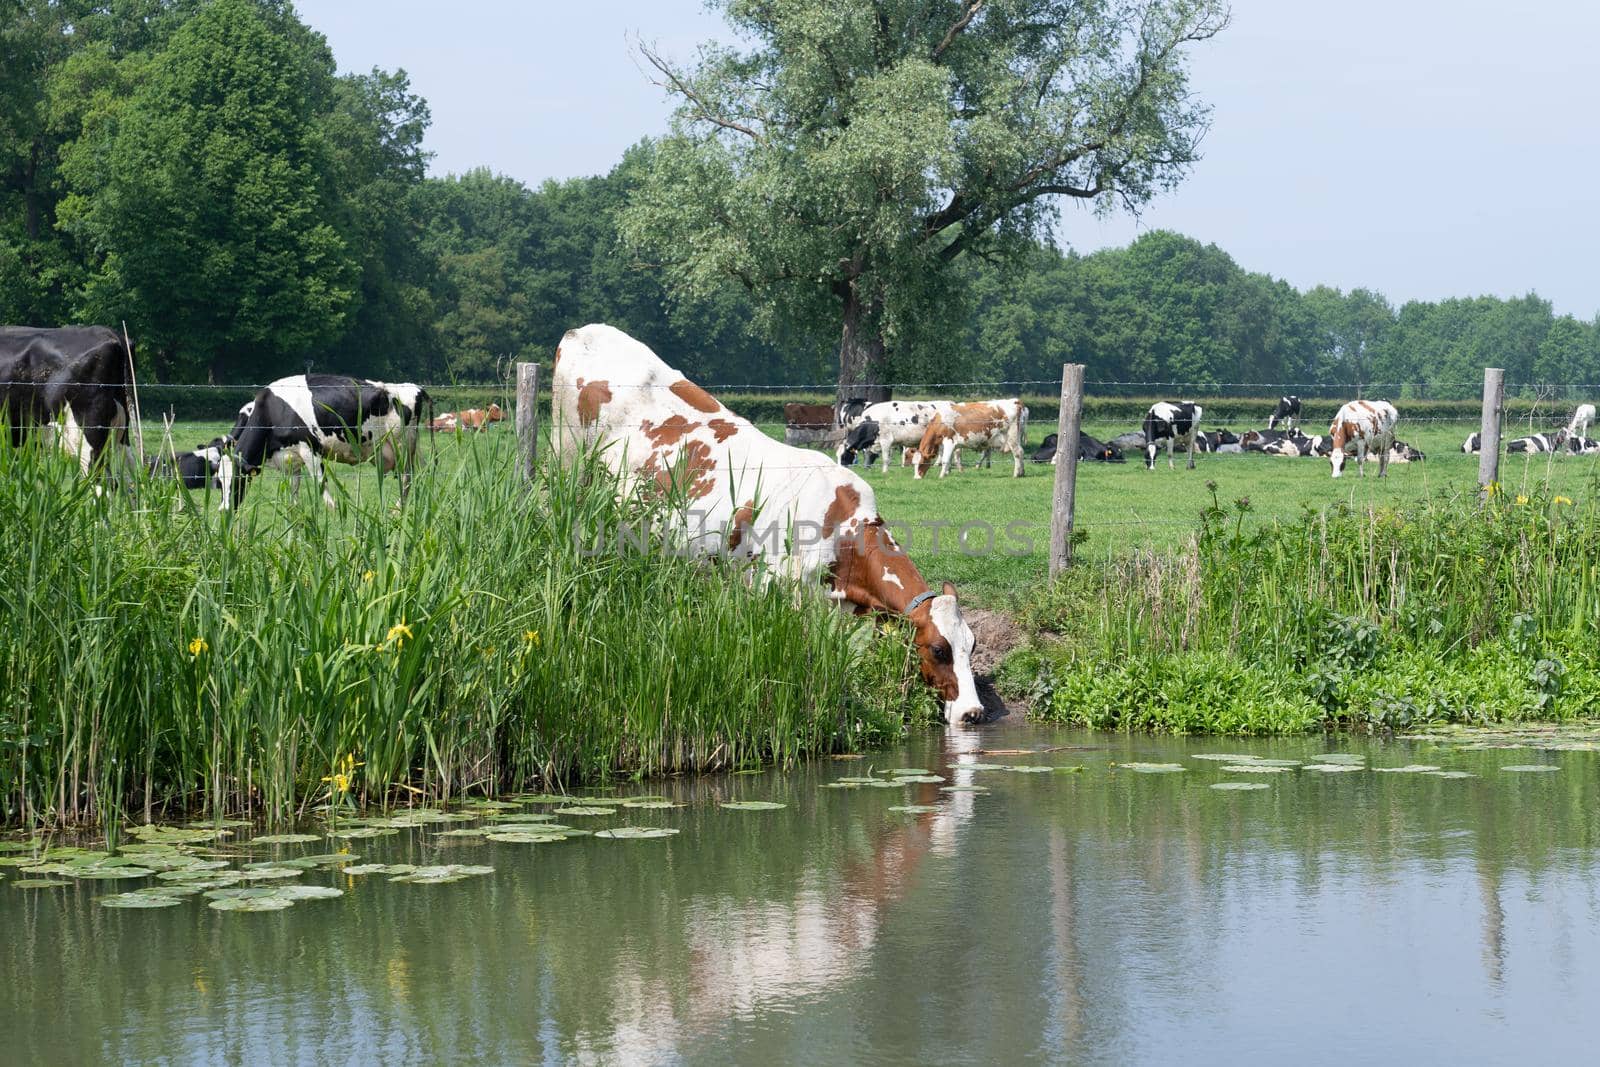 Red white brown cow in a meadow drinking water on the bank of a river with her reflection in the water on a sunny day in summer  by LeoniekvanderVliet